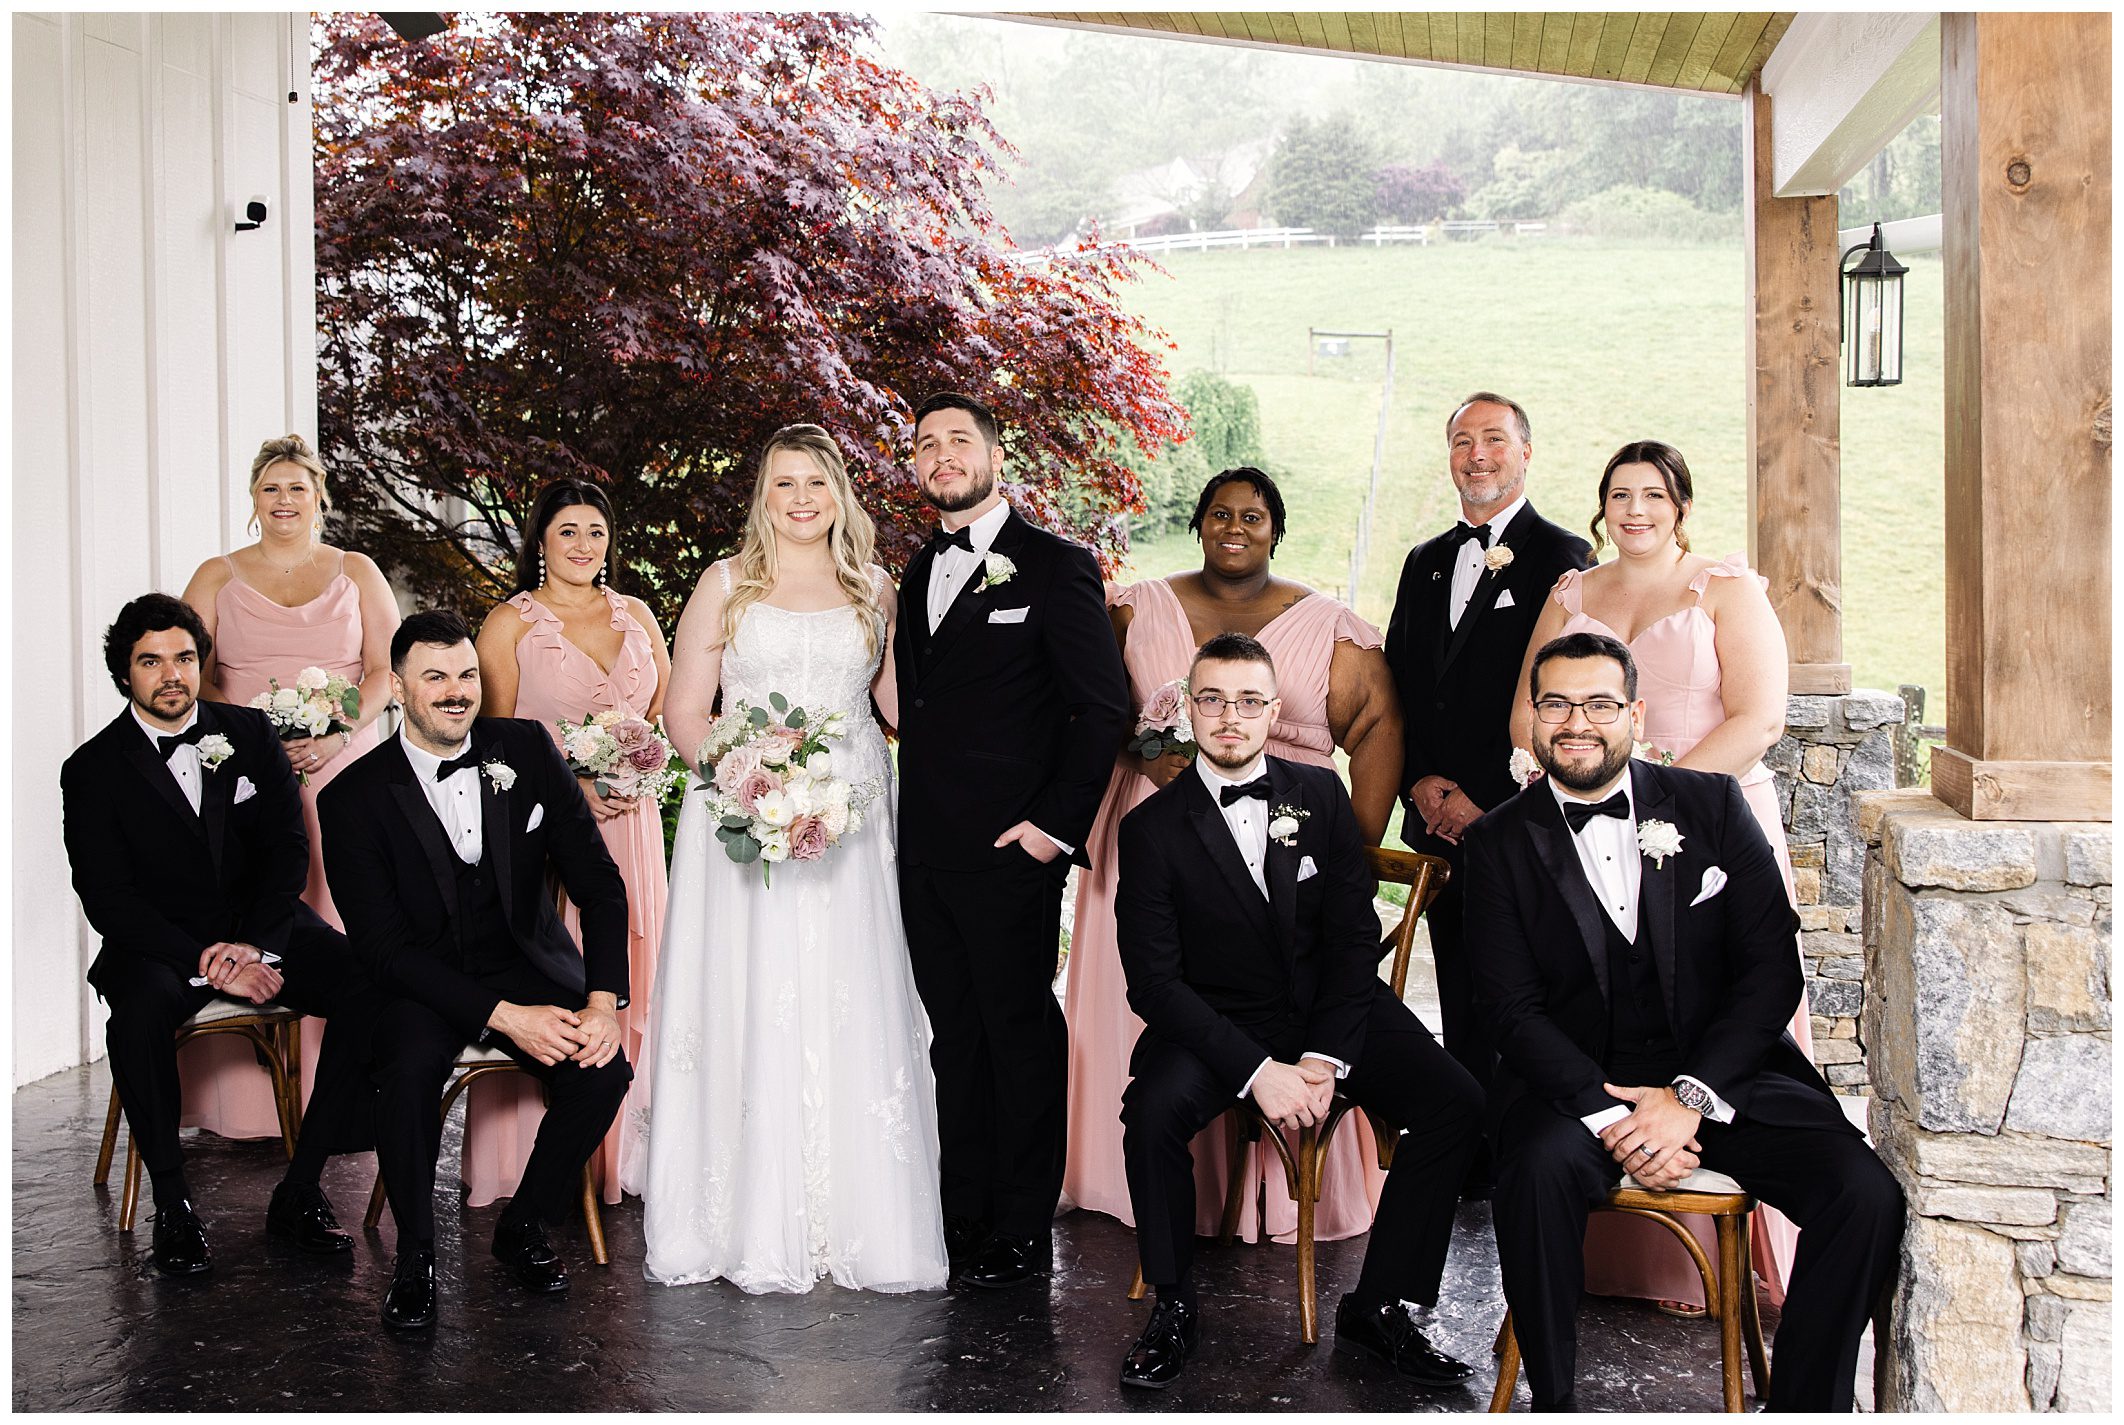 Wedding party posing together under a covered patio at Chestnut Ridge, featuring a bride and groom in the center, with bridesmaids in pink and groomsmen in black tuxedos.